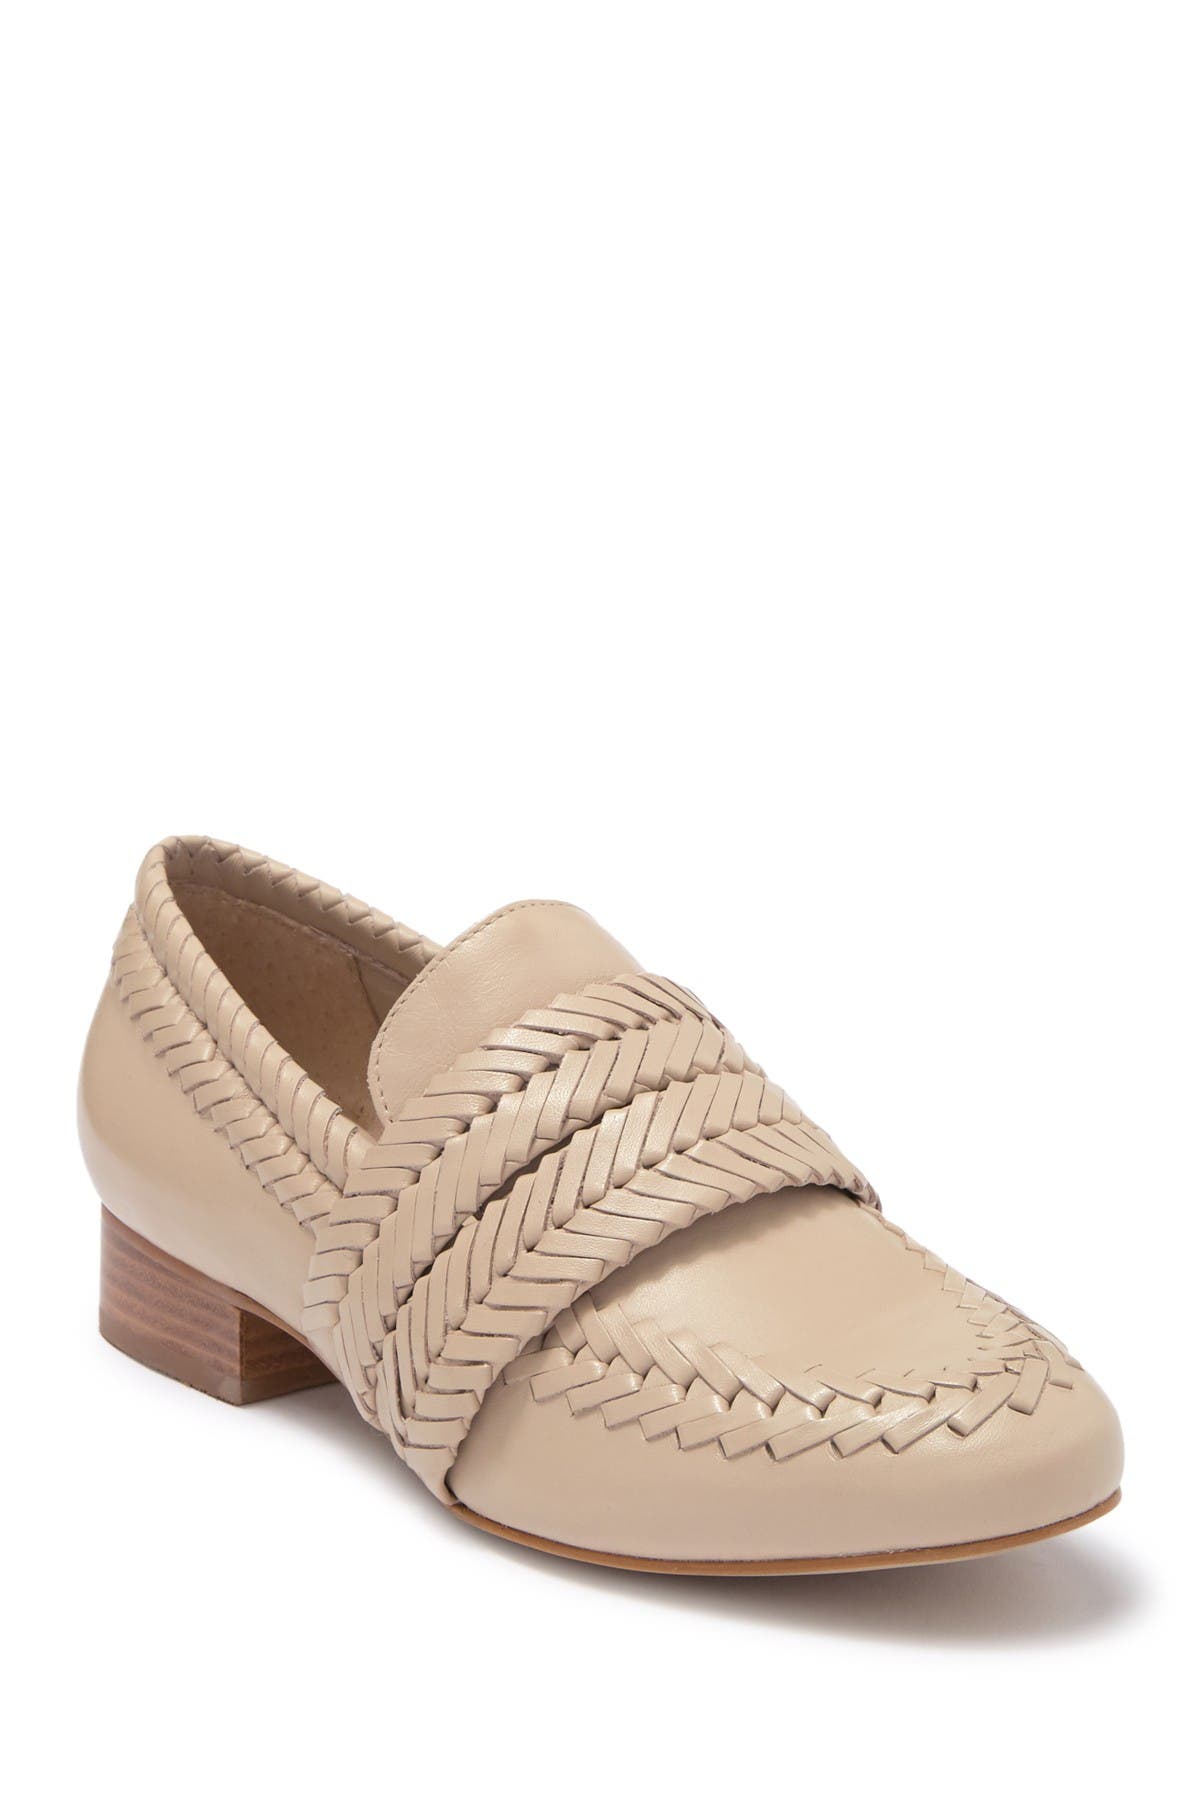 Matisse | Edith Woven Leather Loafer 